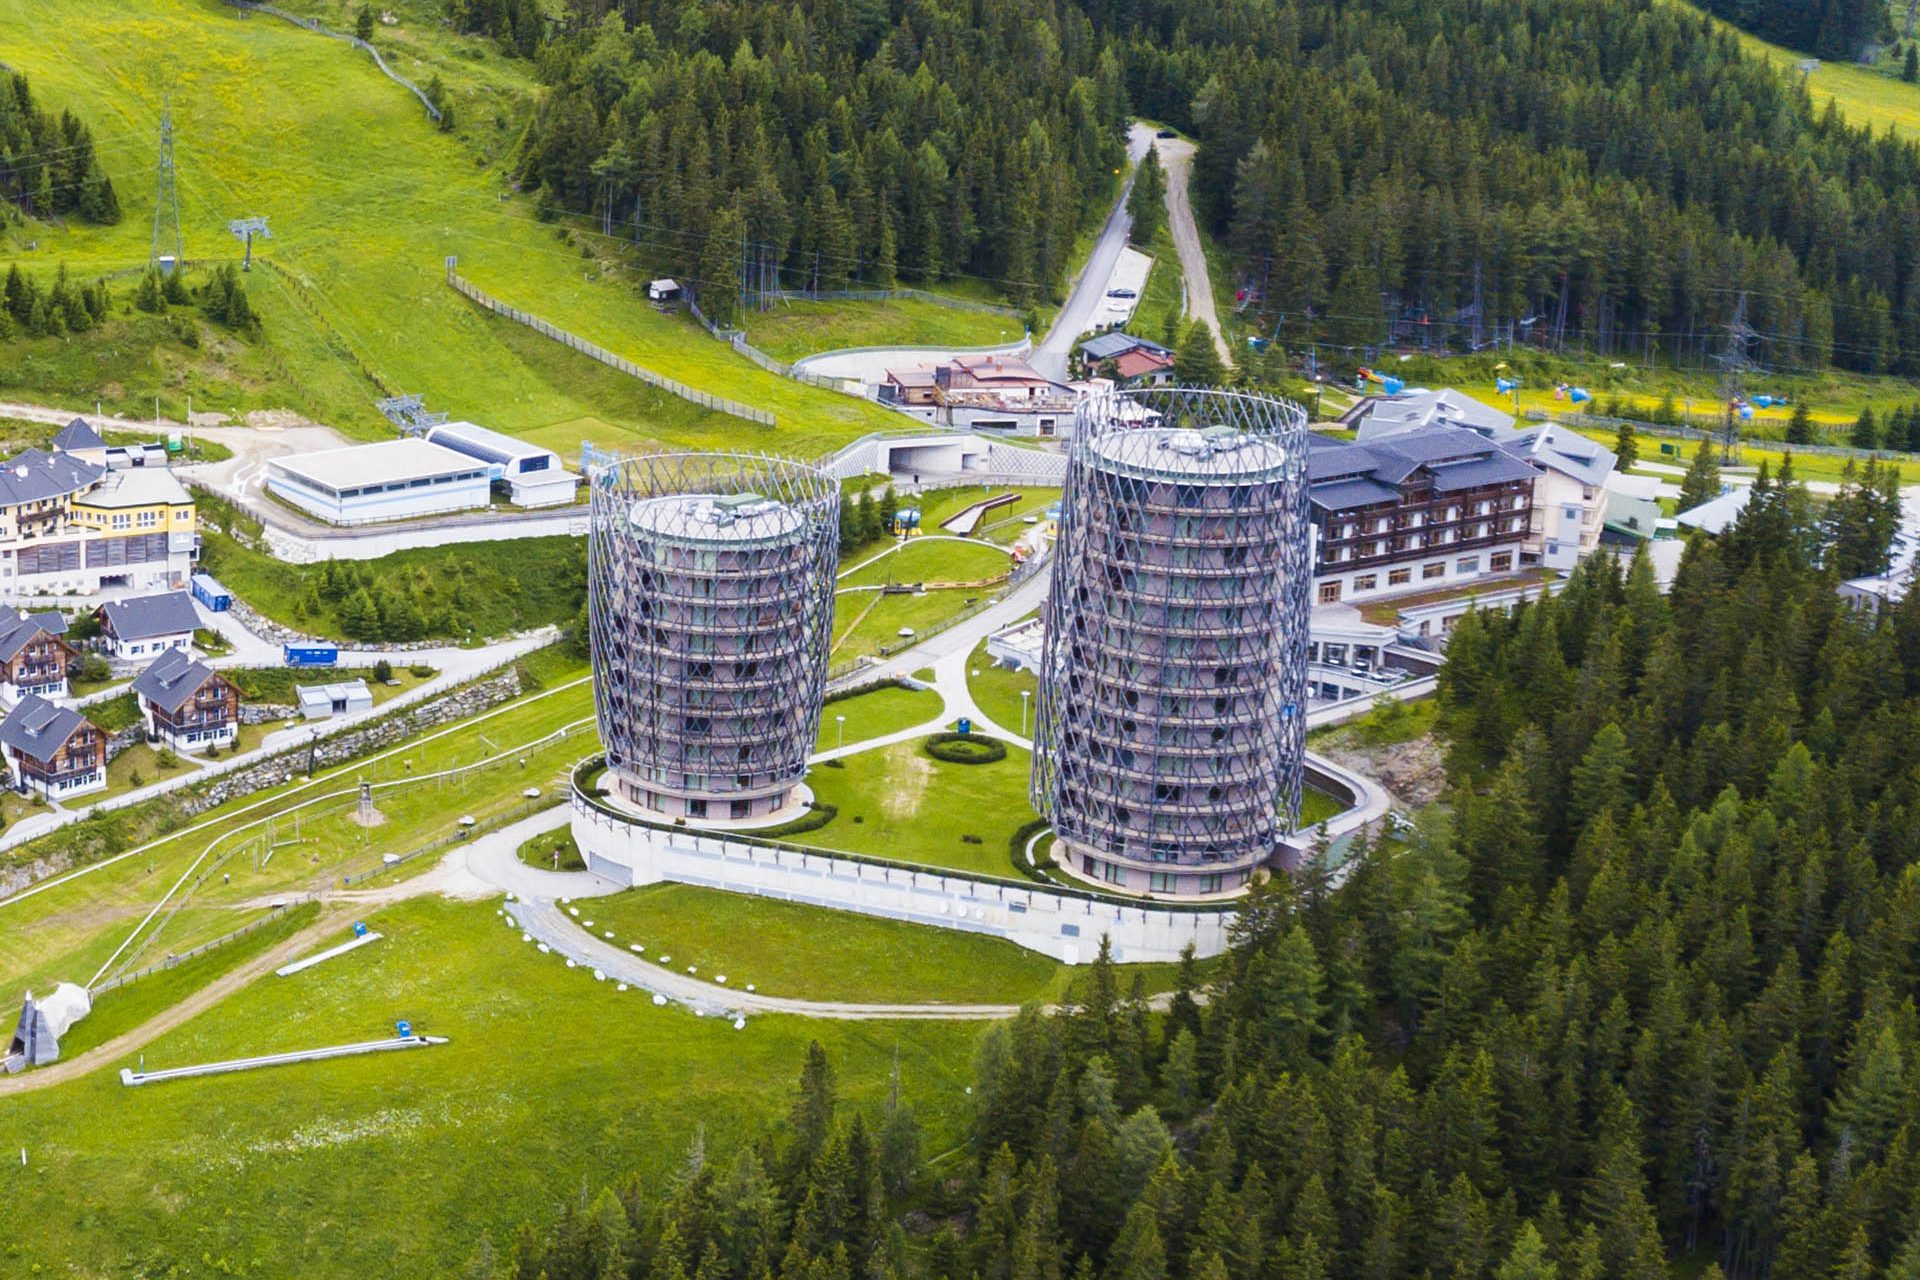 <p>The Matteo Thun & Partners studio conceived these two towers for the Austrian town of Katschberg and which act as a symbolic gateway between the two provinces of Salzburg and Carinthia. It is the expansion of a hotel that already existed with structures made of prefabricated wooden walls and slabs which are made up of a light wooden framework.</p>